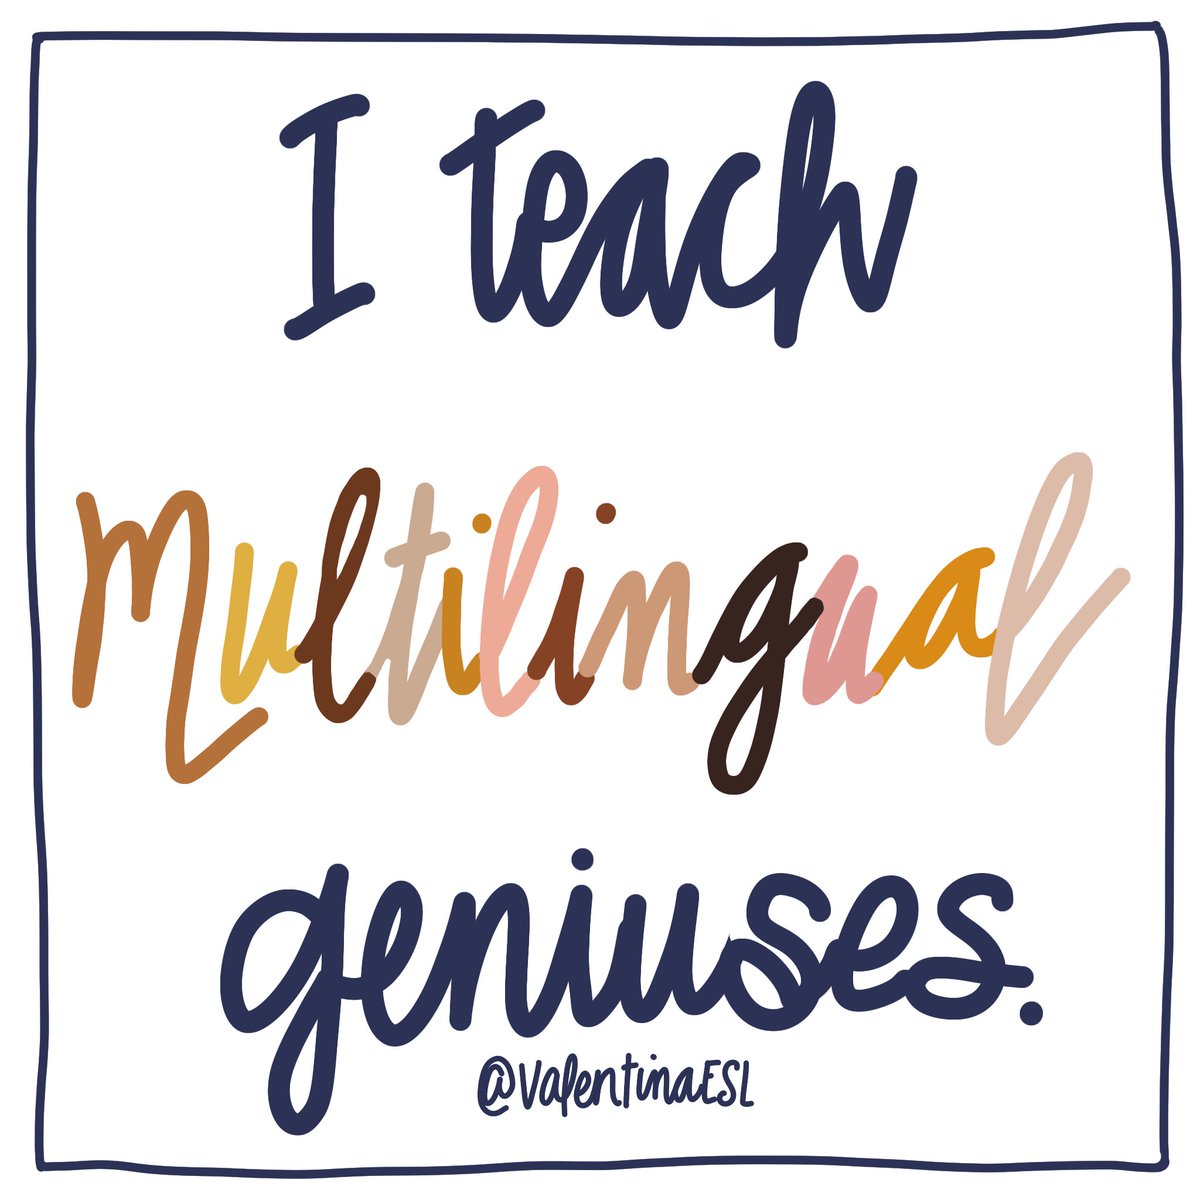 Happy Teacher Appreciation Week to all the educators out there! Your IMPACT is immeasurable. #TeacherAppreciationWeek2022 #Teachers #TeacherAppreciation2022 #education #ESLImpact #ESOL #multilingualsupport #multilingual #edutwitter #DiversityandInclusion